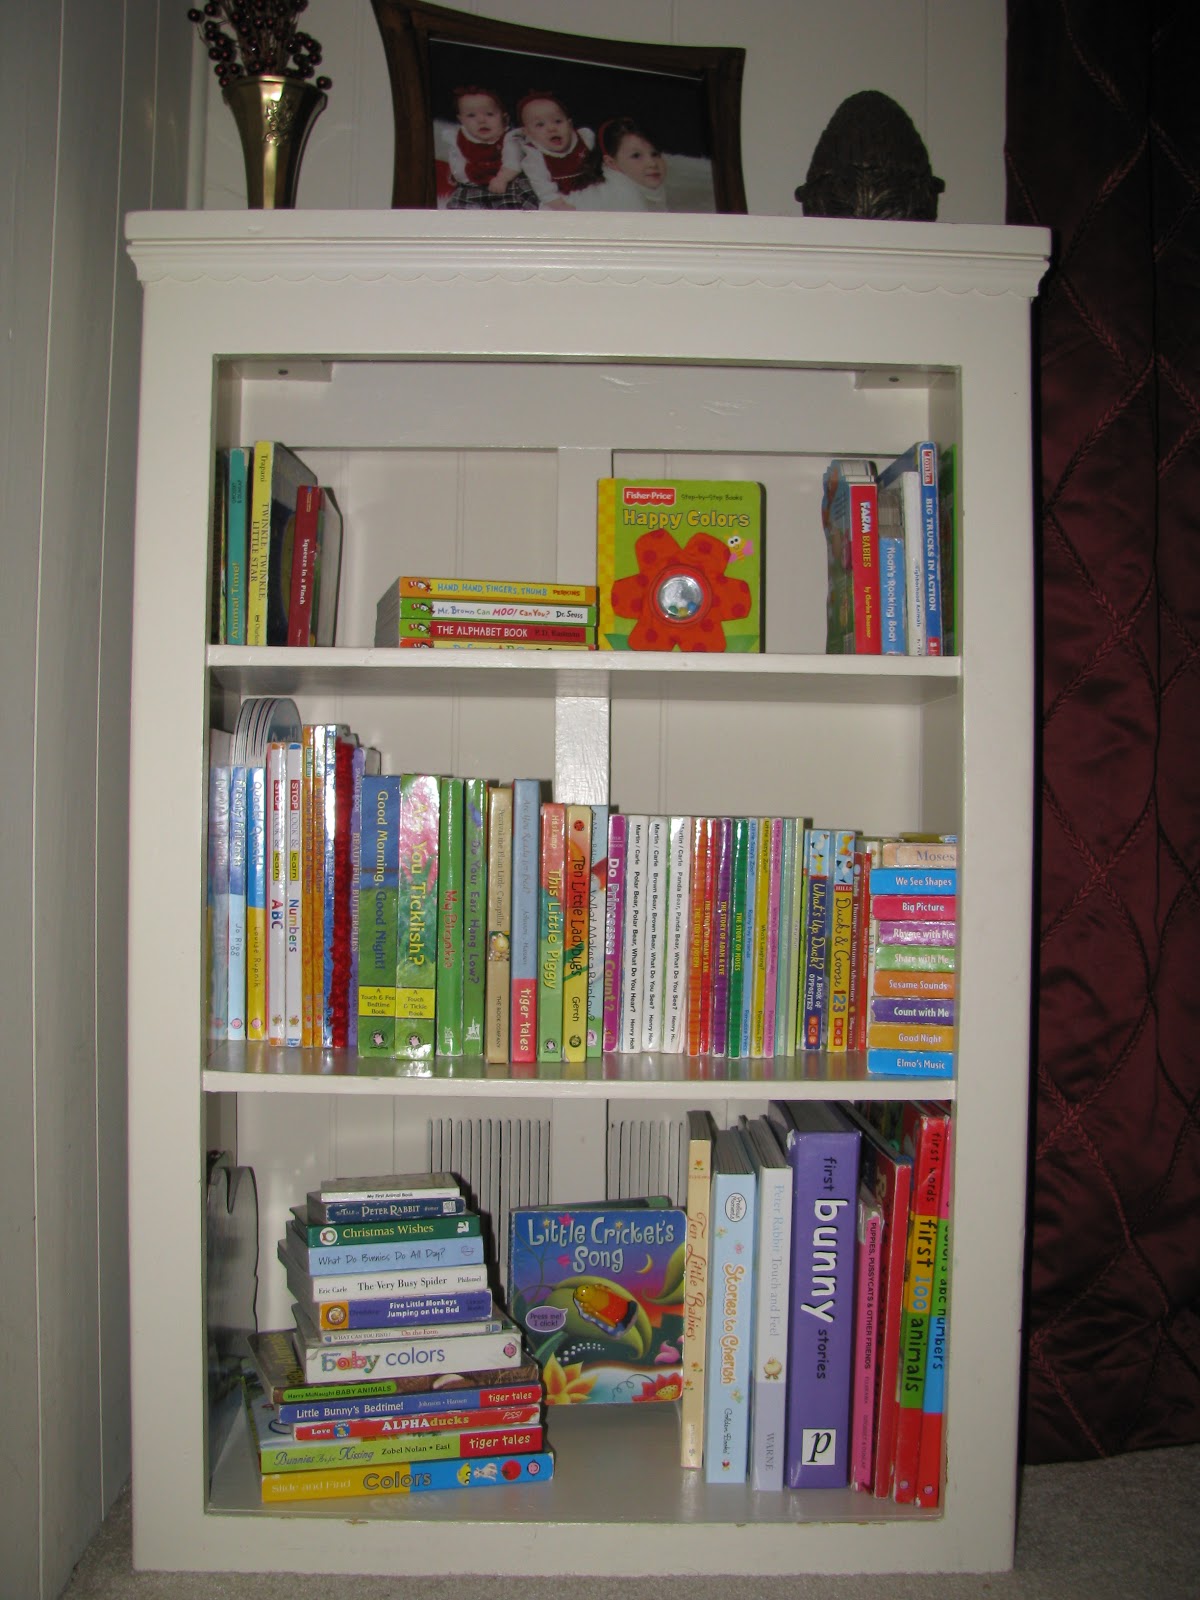 The Book Shelves Are Refurbished Kitchen Cabis That I Painted And